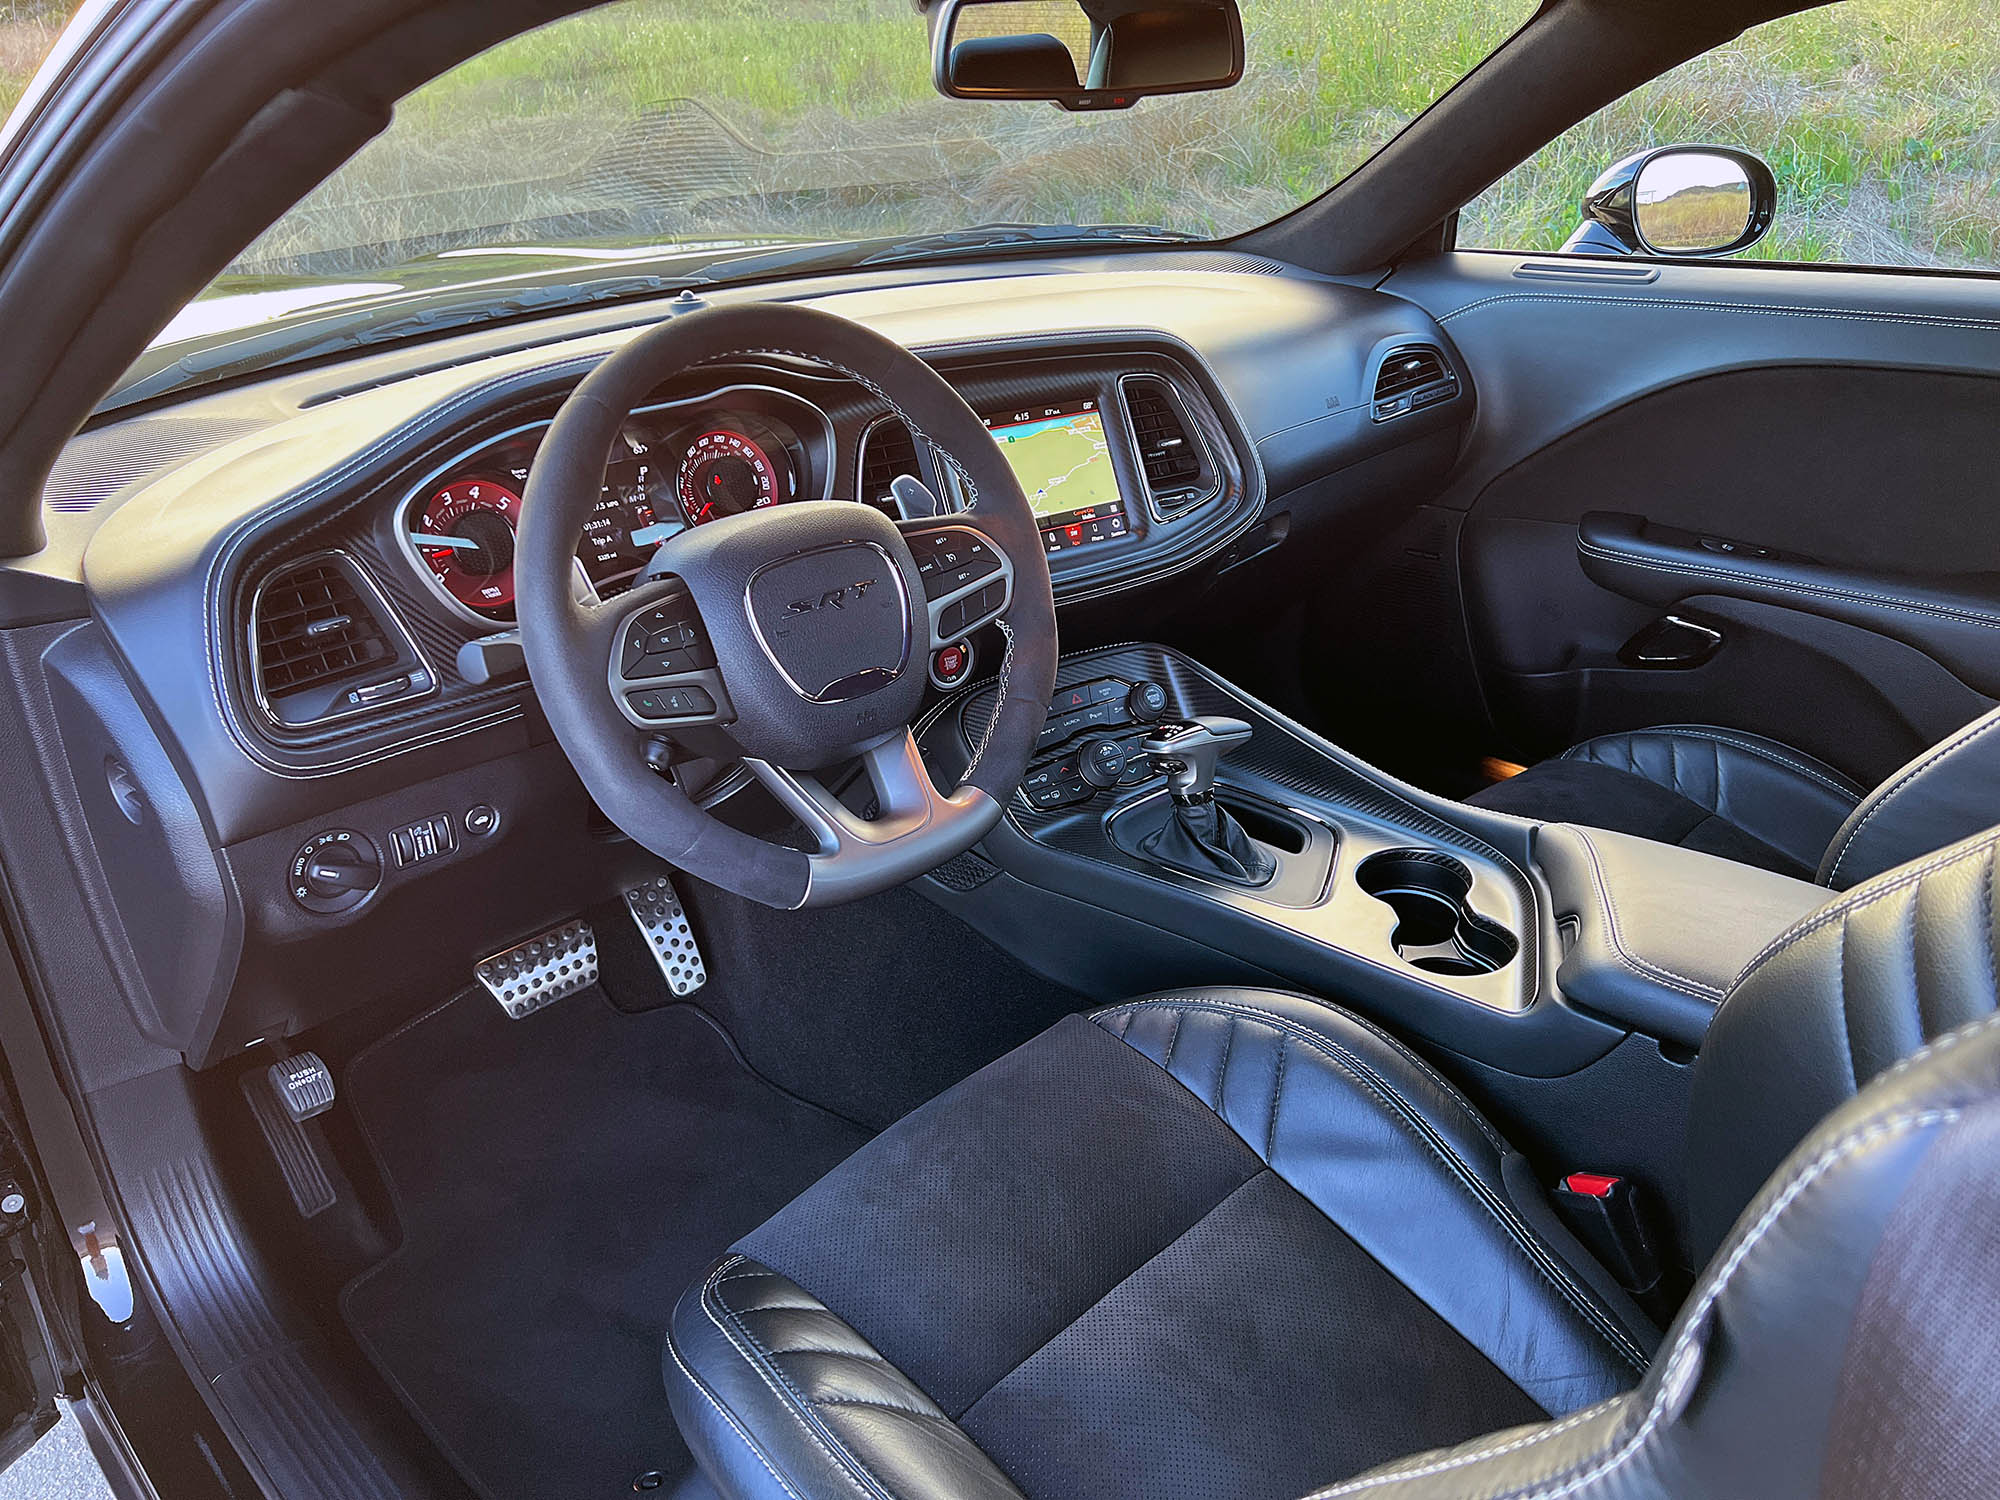 2023 Dodge Challenger Black Ghost interior, dashboard, and front seats.